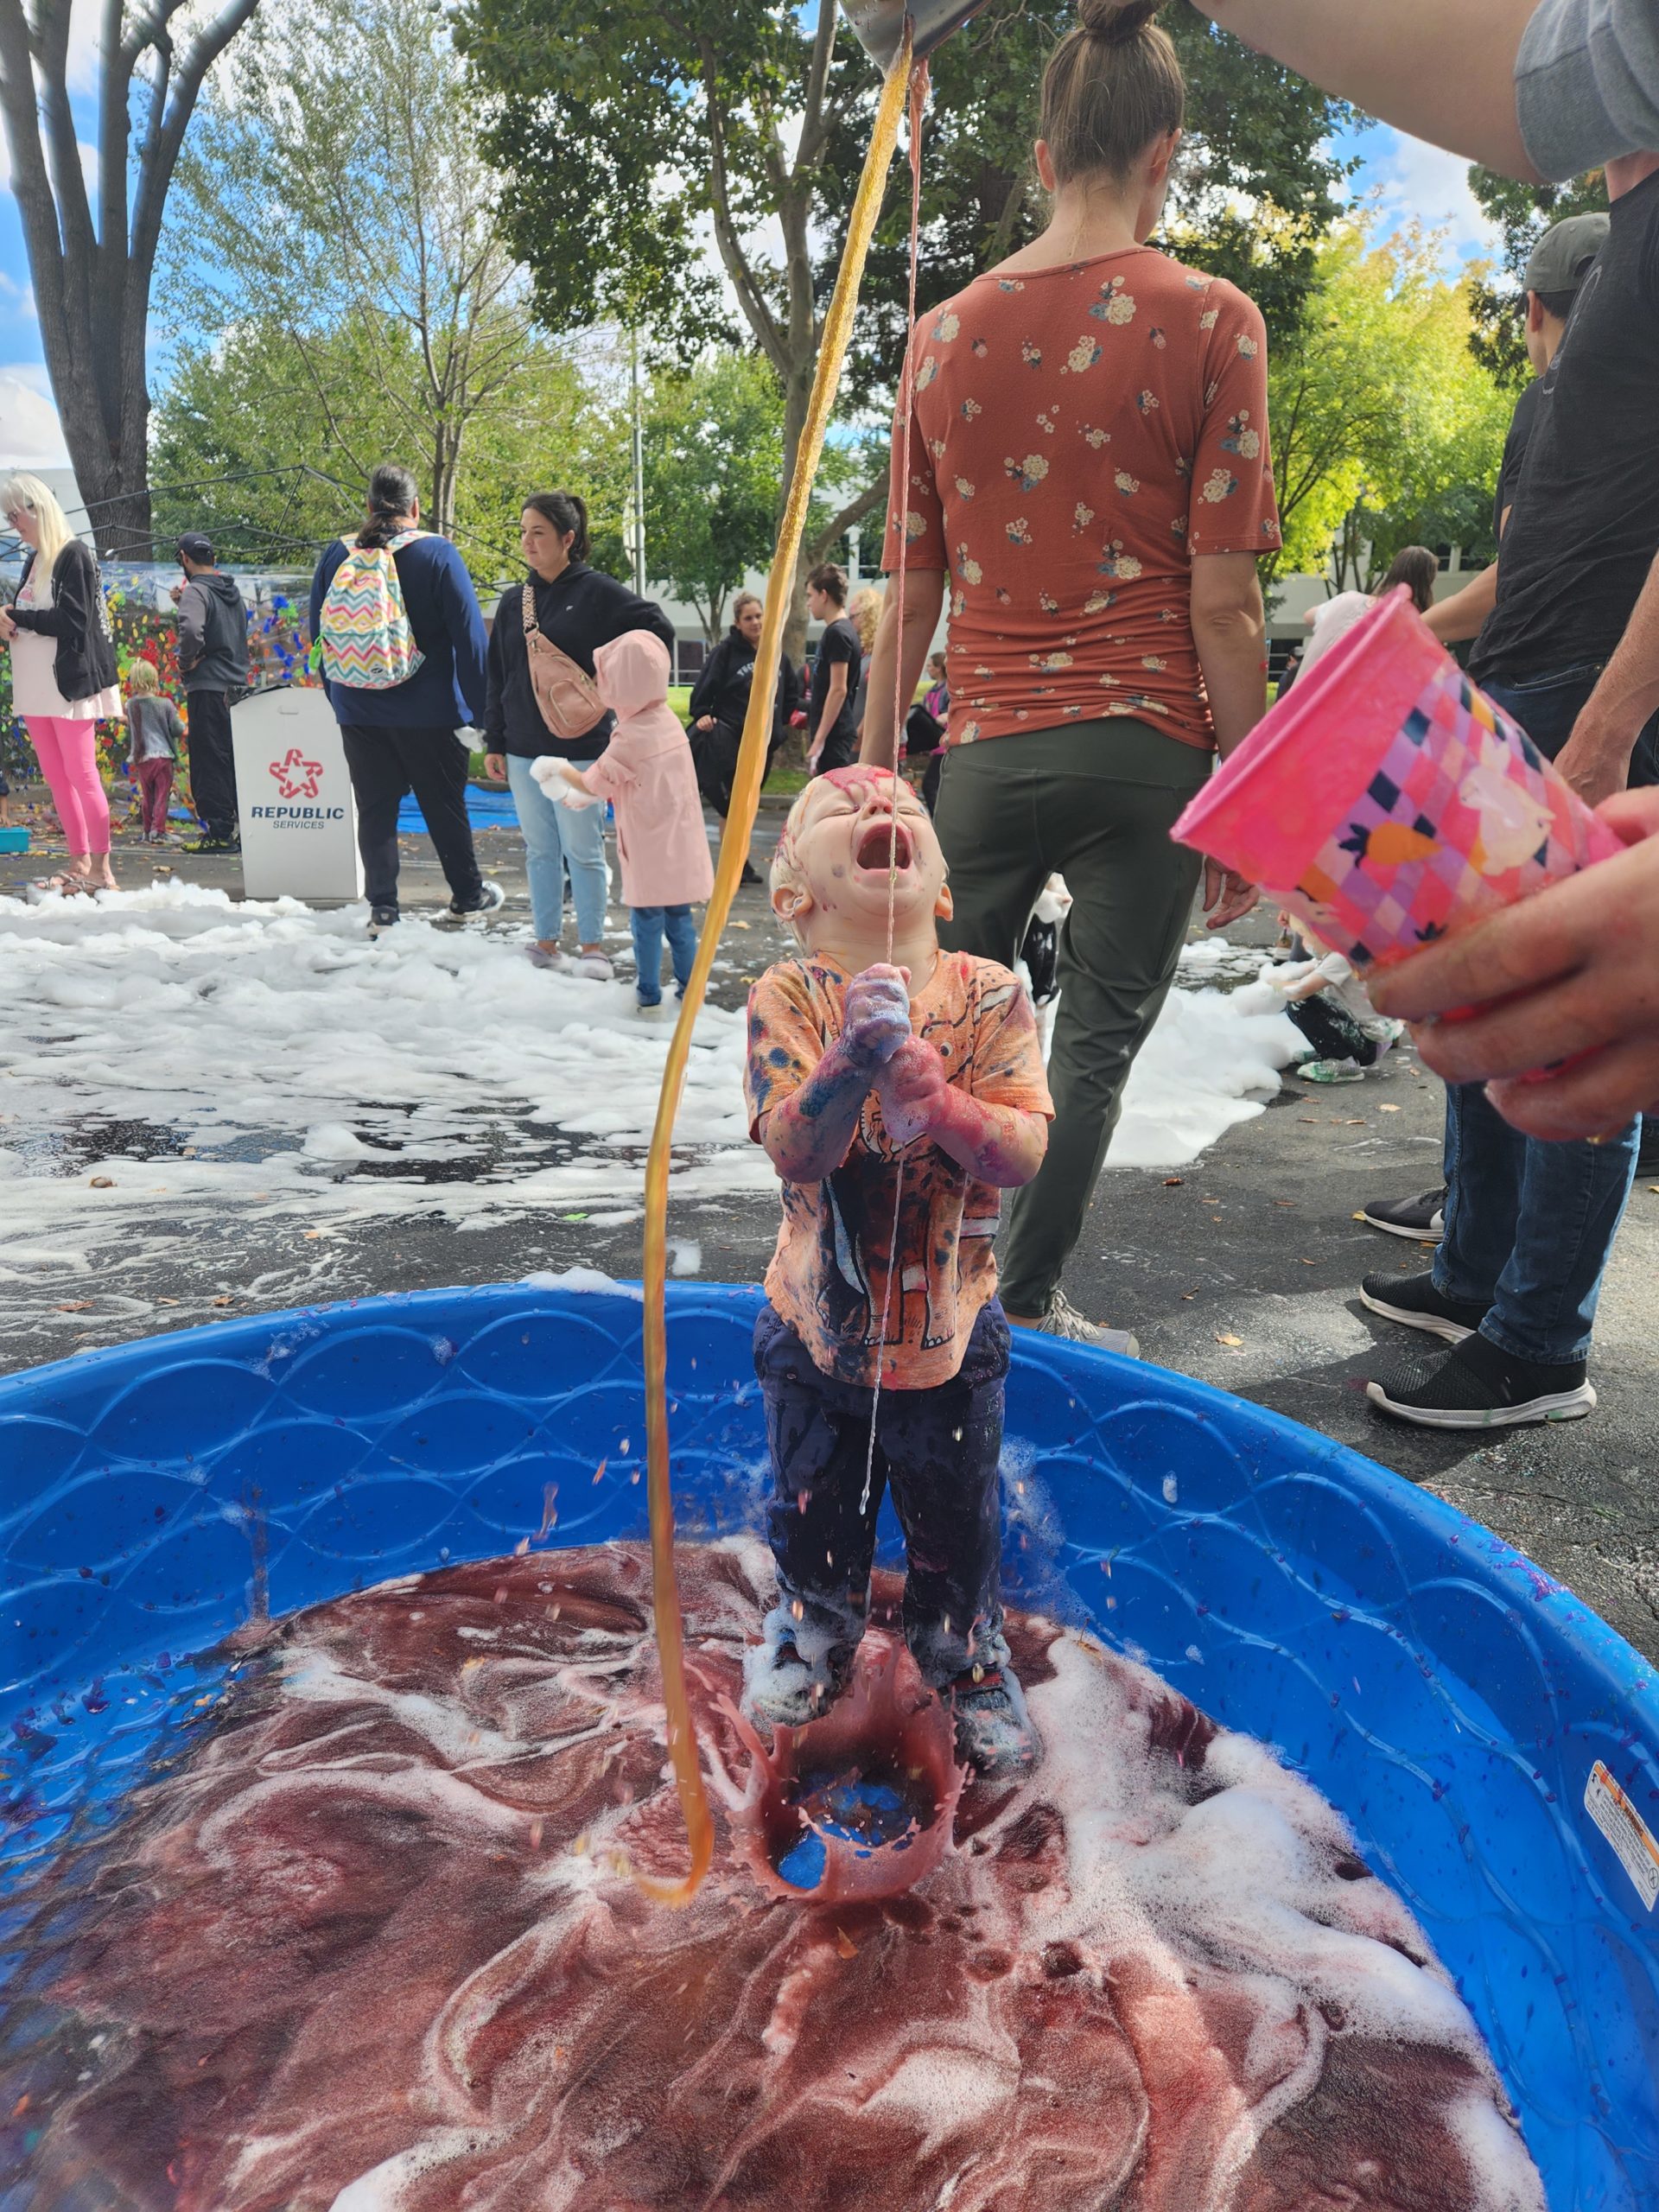 A boy happily dumps slime on himself in a blue baby pool at our Mess Fest event